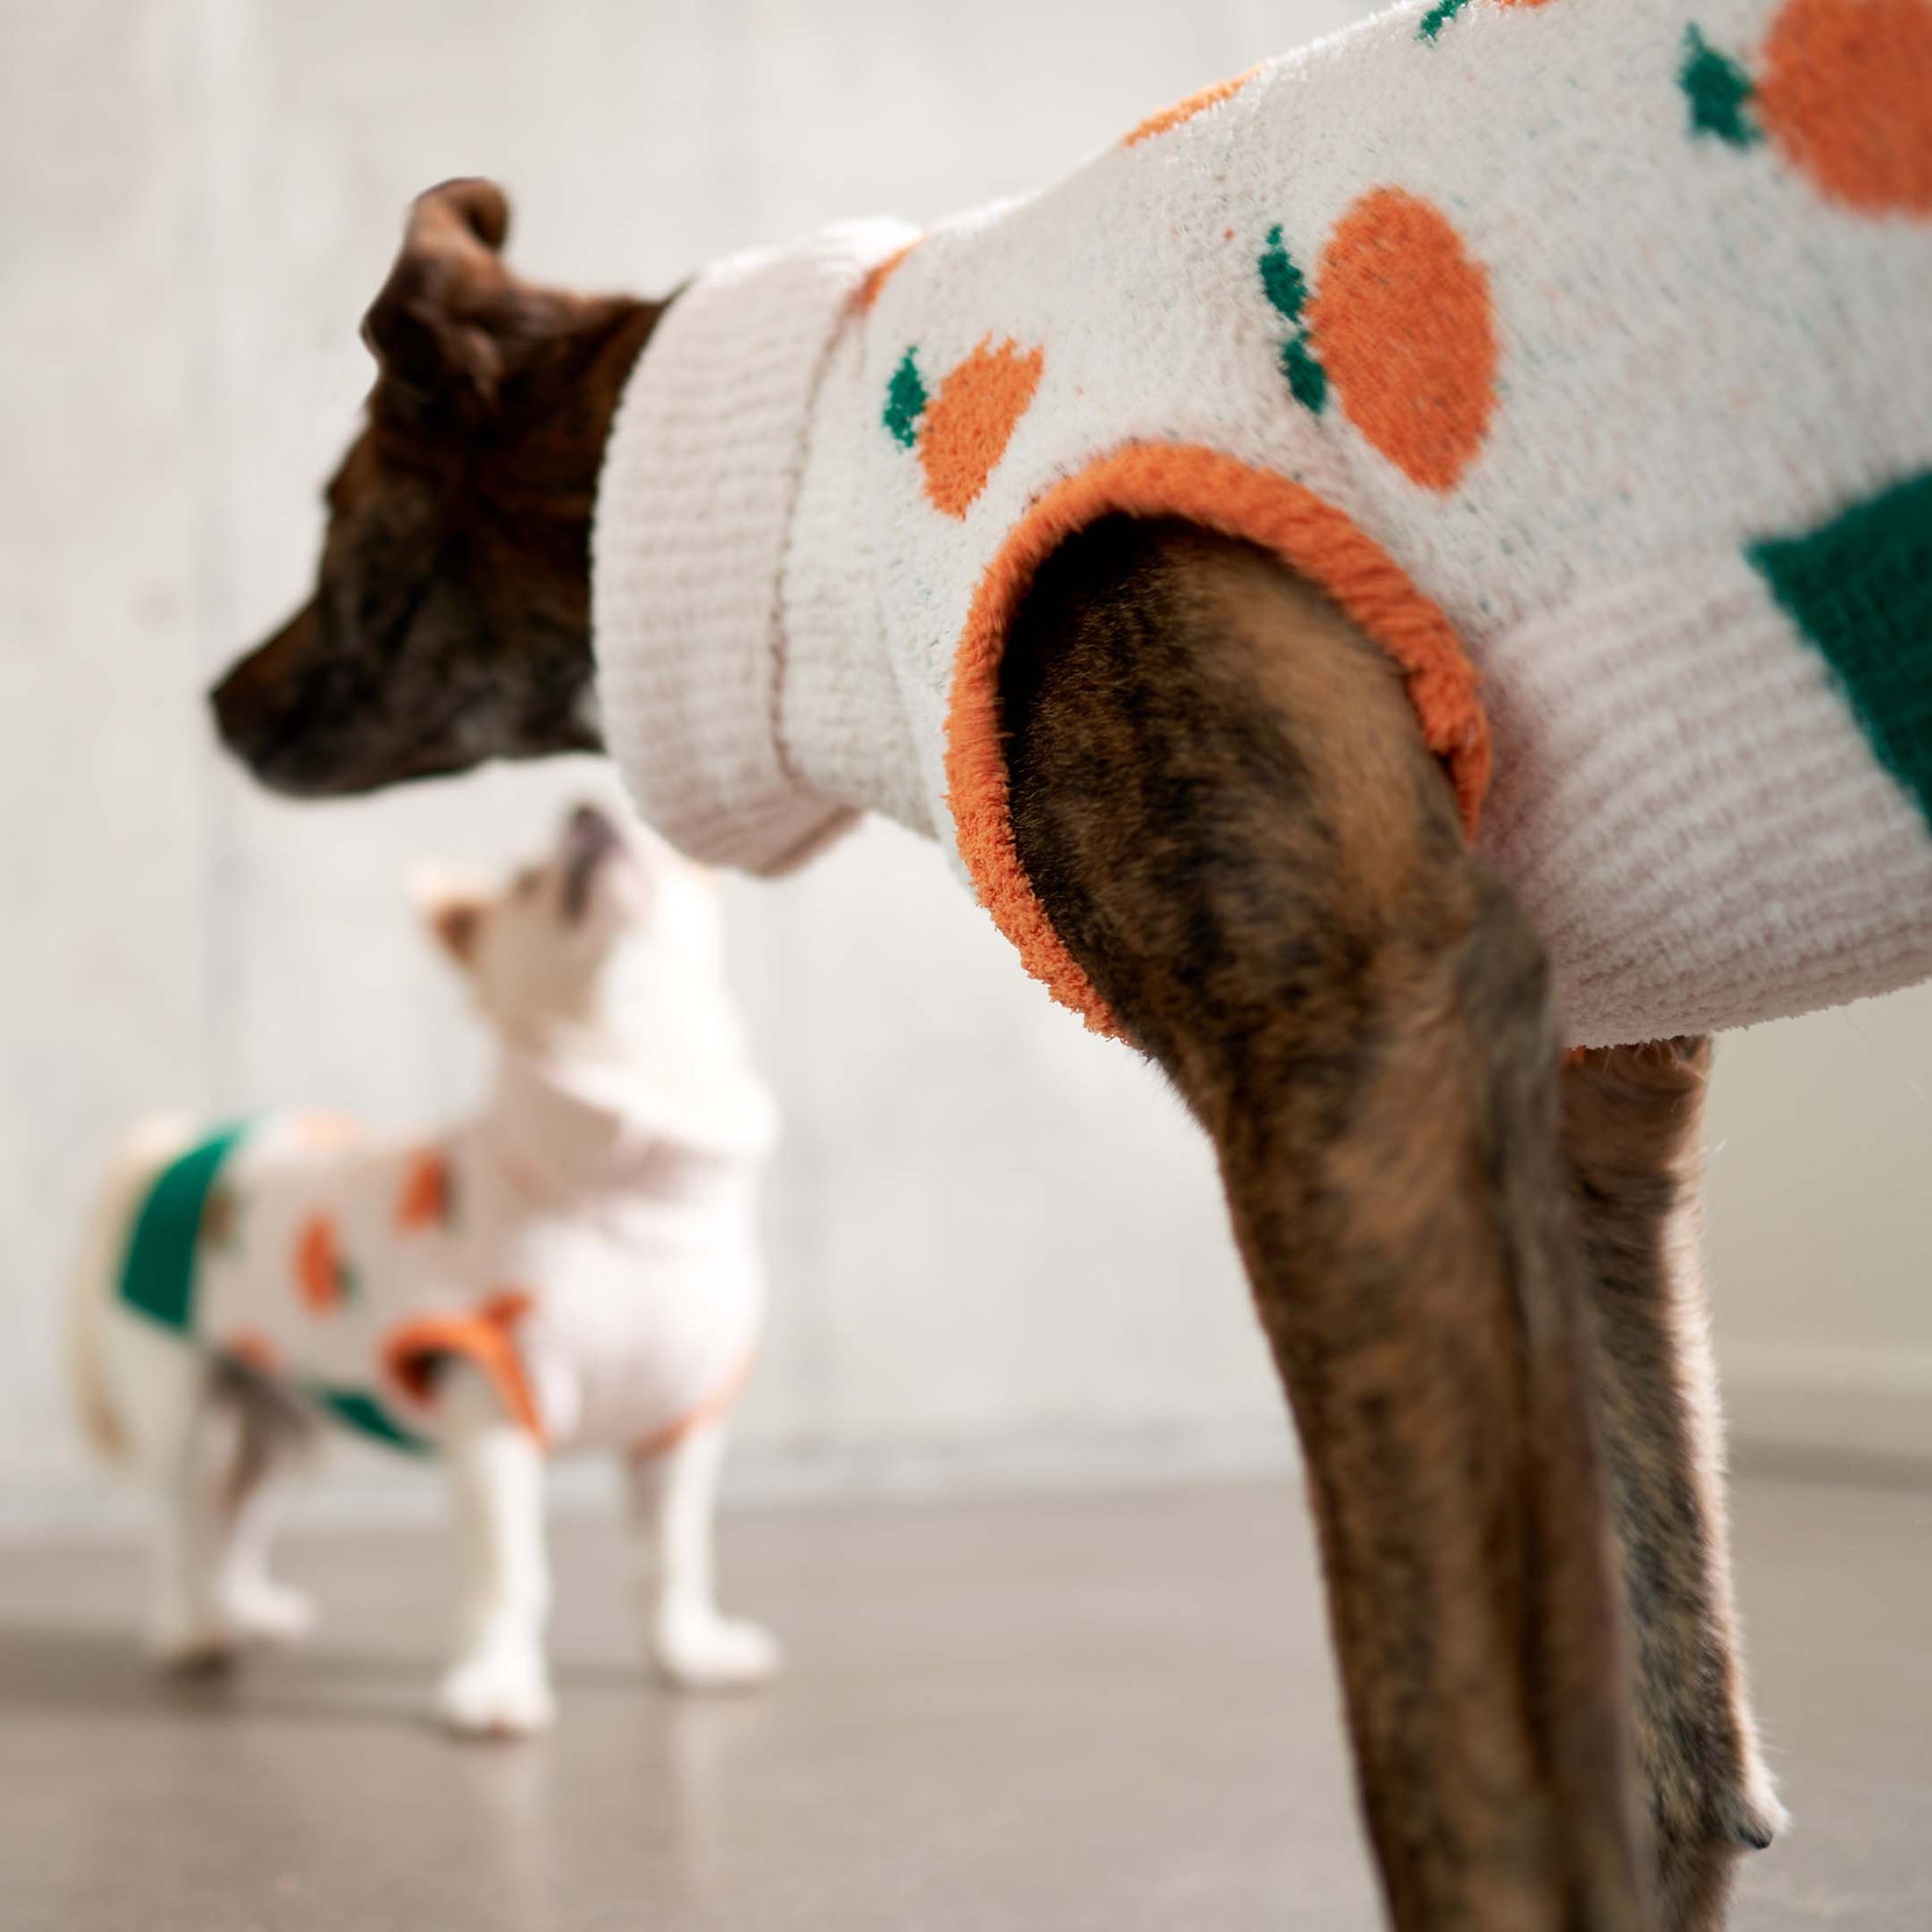  Two dogs wearing stylish "The Furryfolks" orange sweaters, one showcasing the back with a carrot pattern, adding charm to pet fashion.